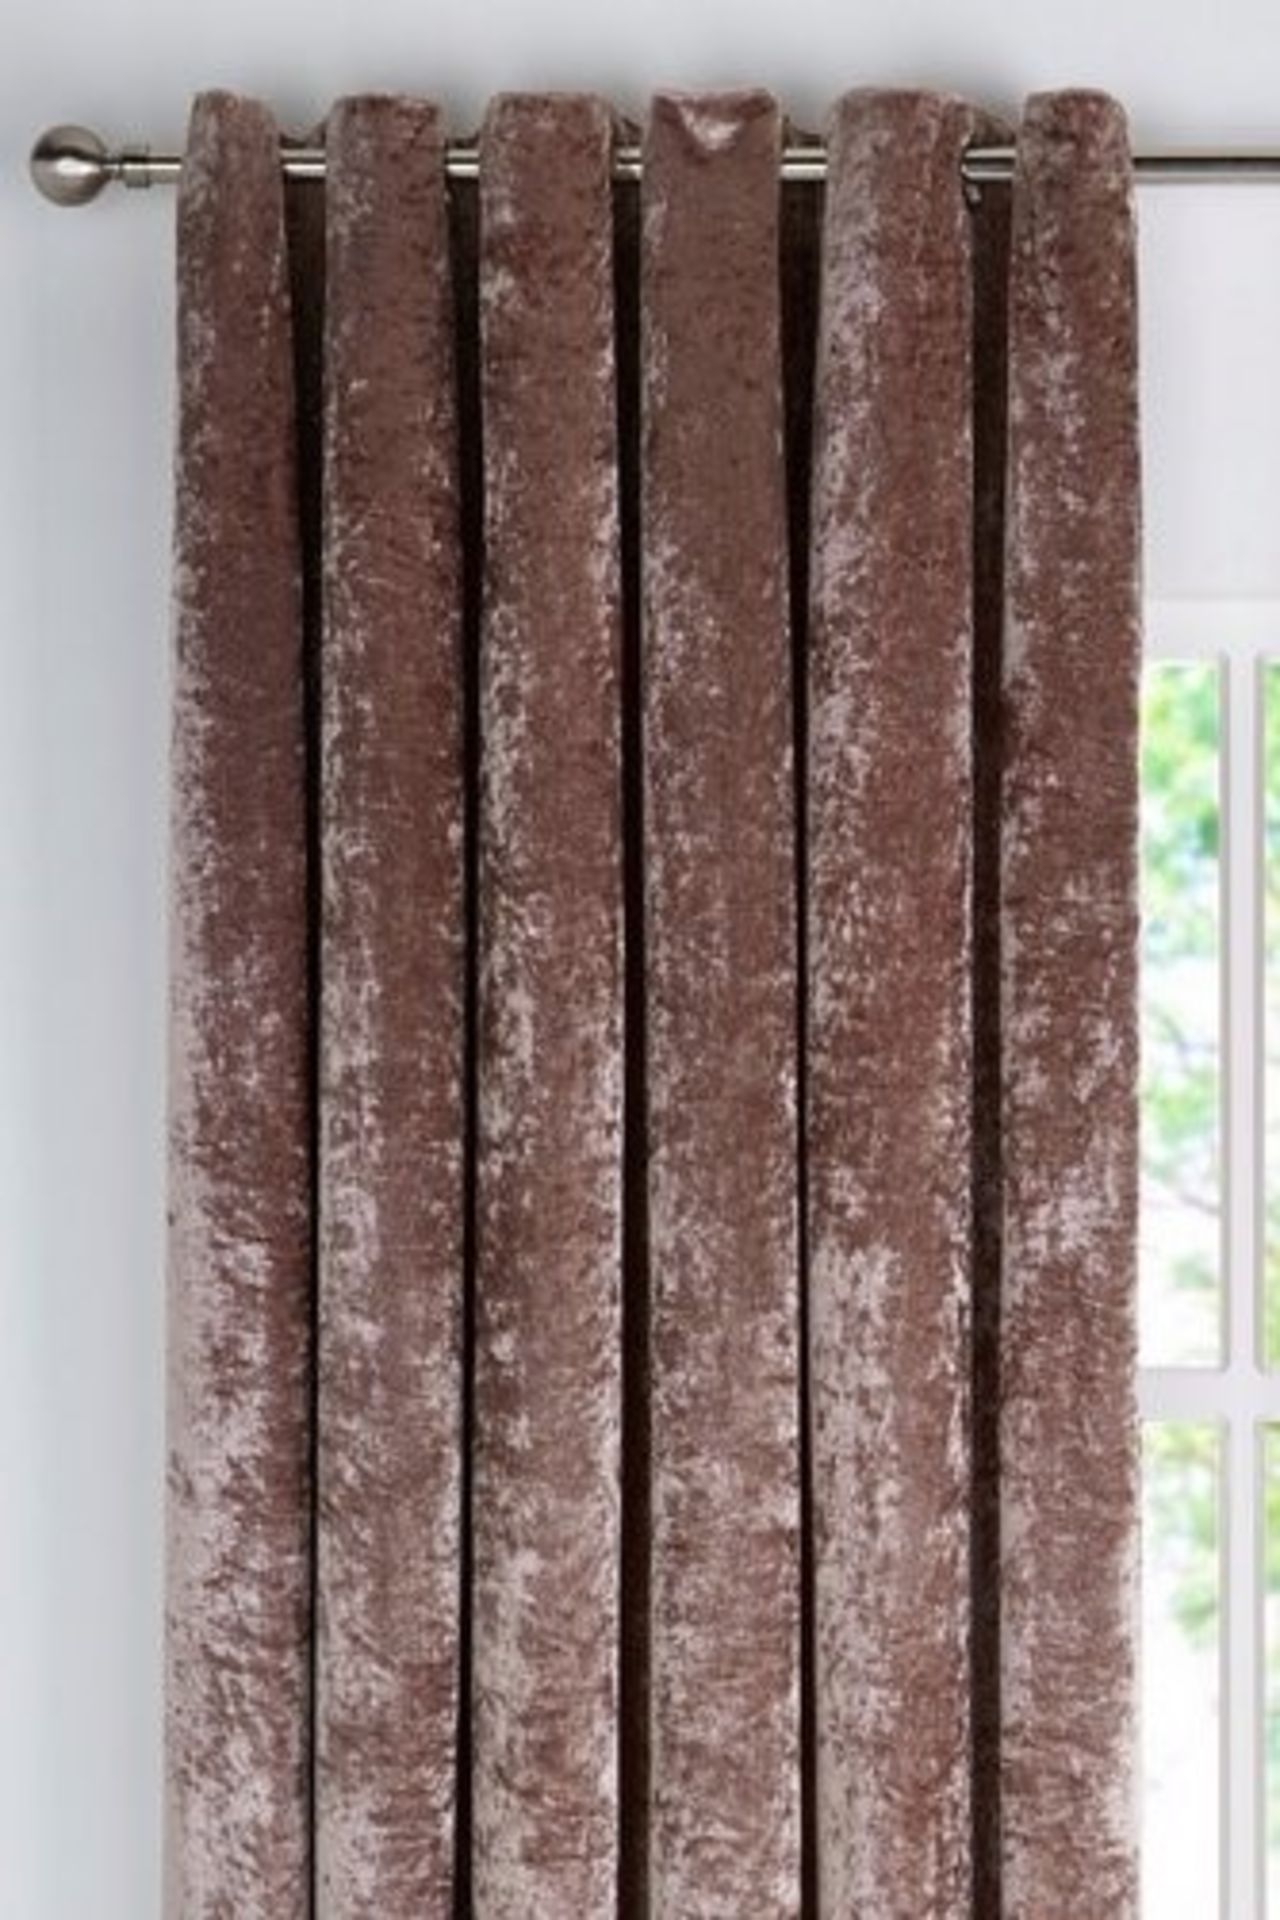 1 AS NEW BAGGED CRUSHED VELVET FULLY LINED EYELET CURTAINS IN MINK / APPROX 66" X 54" (VIEWING